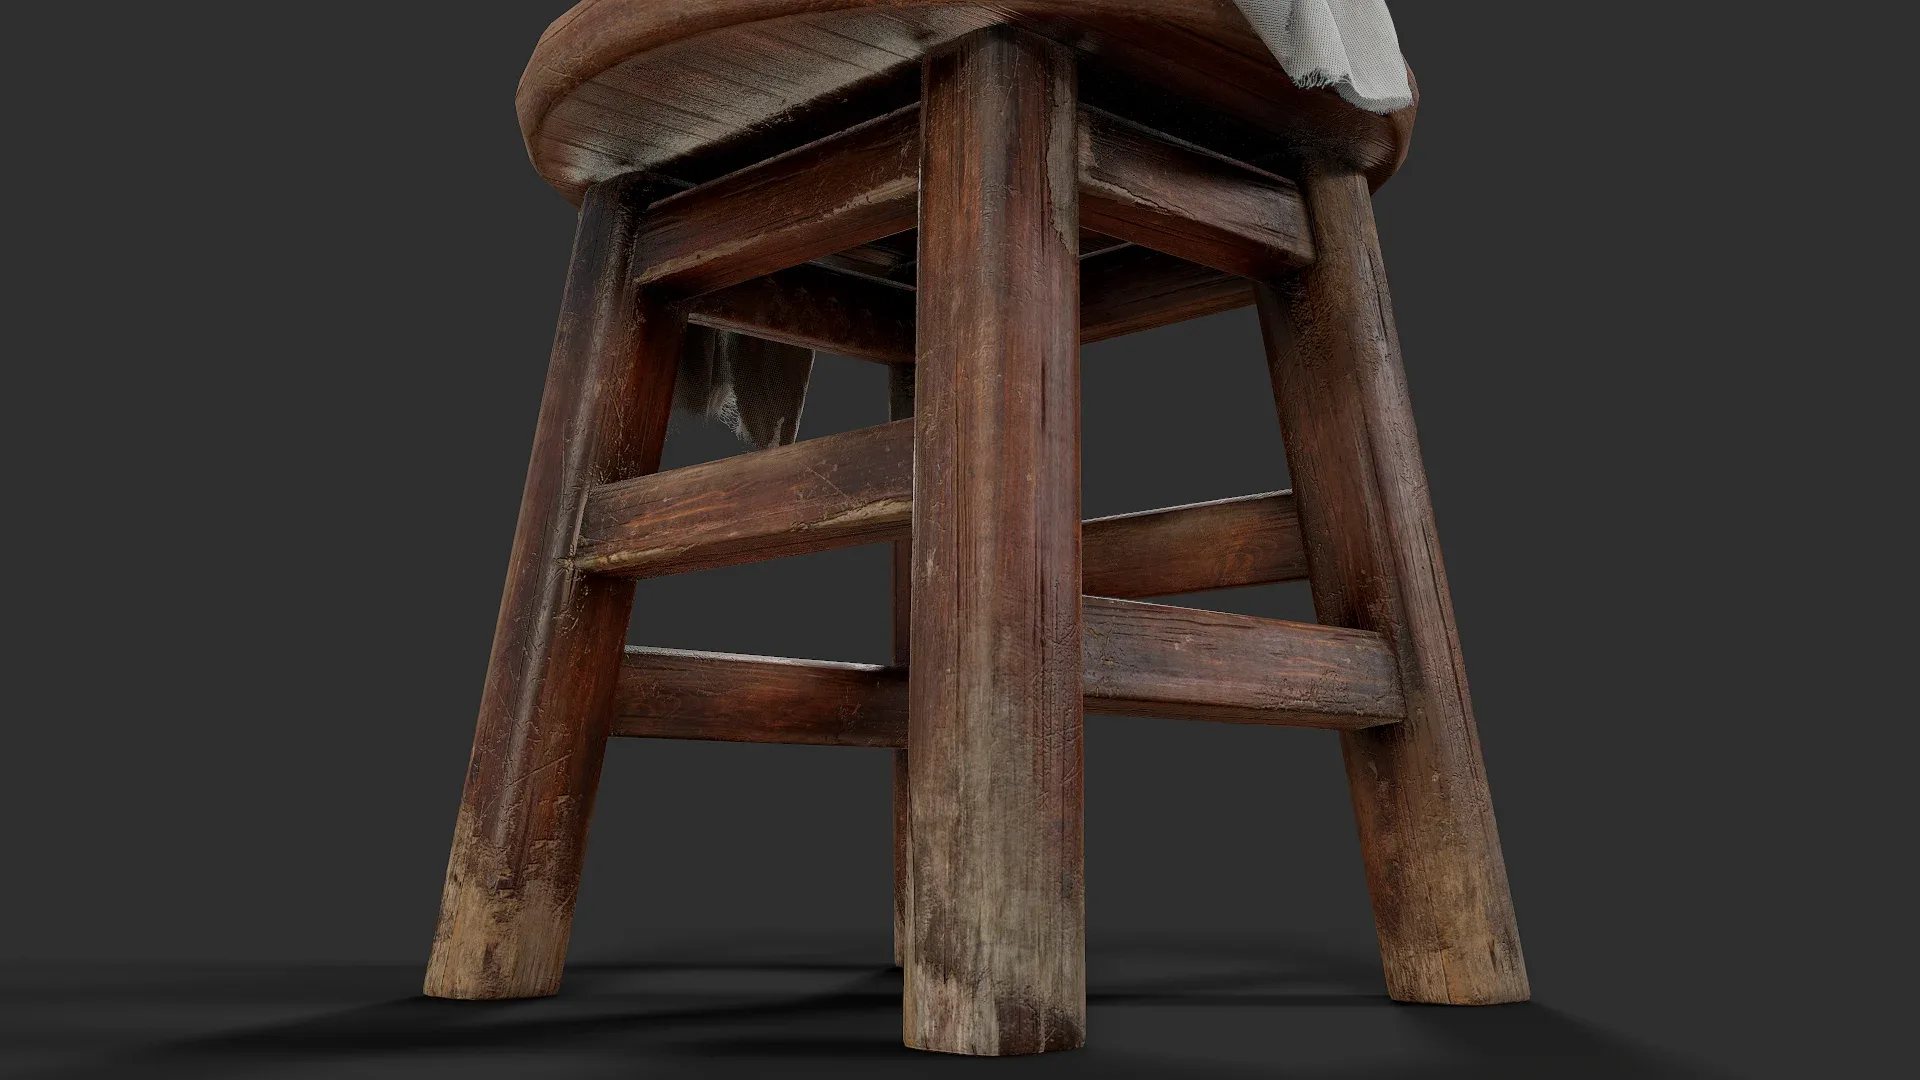 Old Wooden Stool Full Creation Process + Game Ready